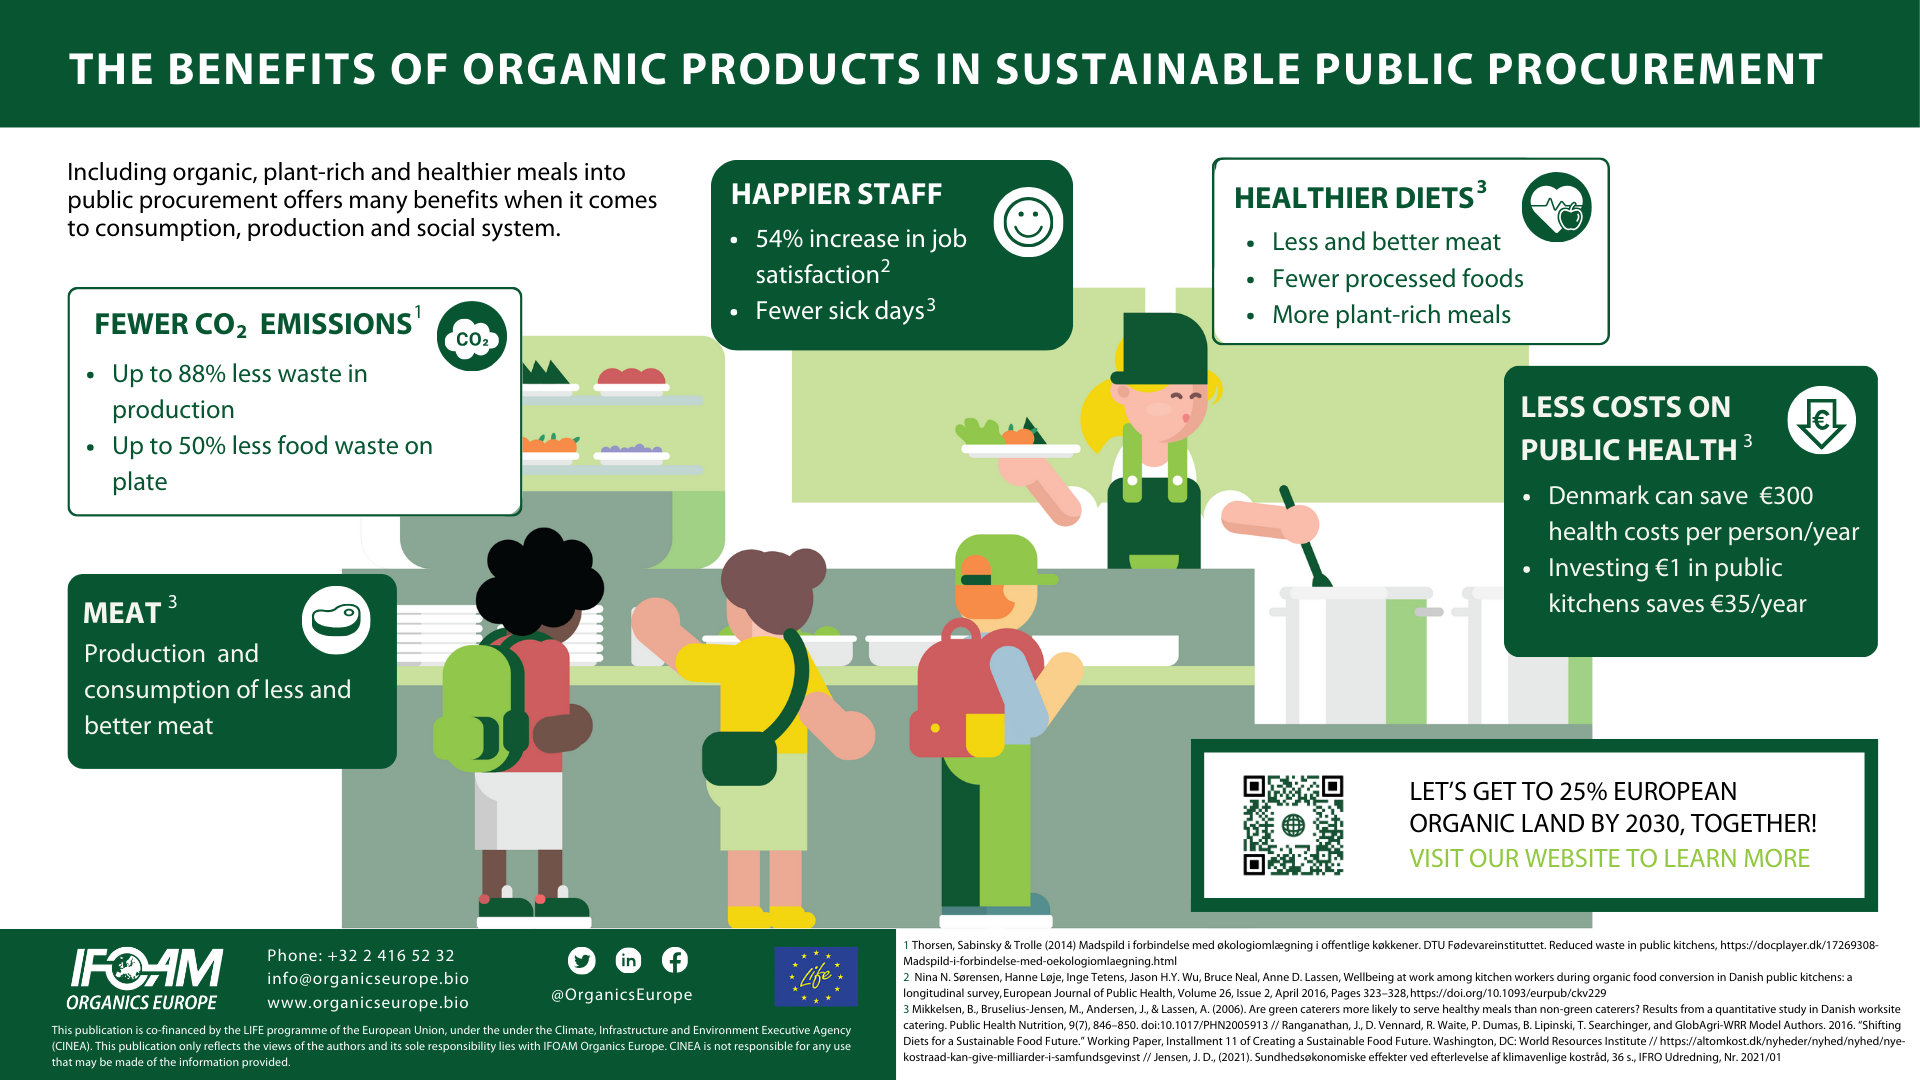 The benefits of organic products in sustainable public procurement